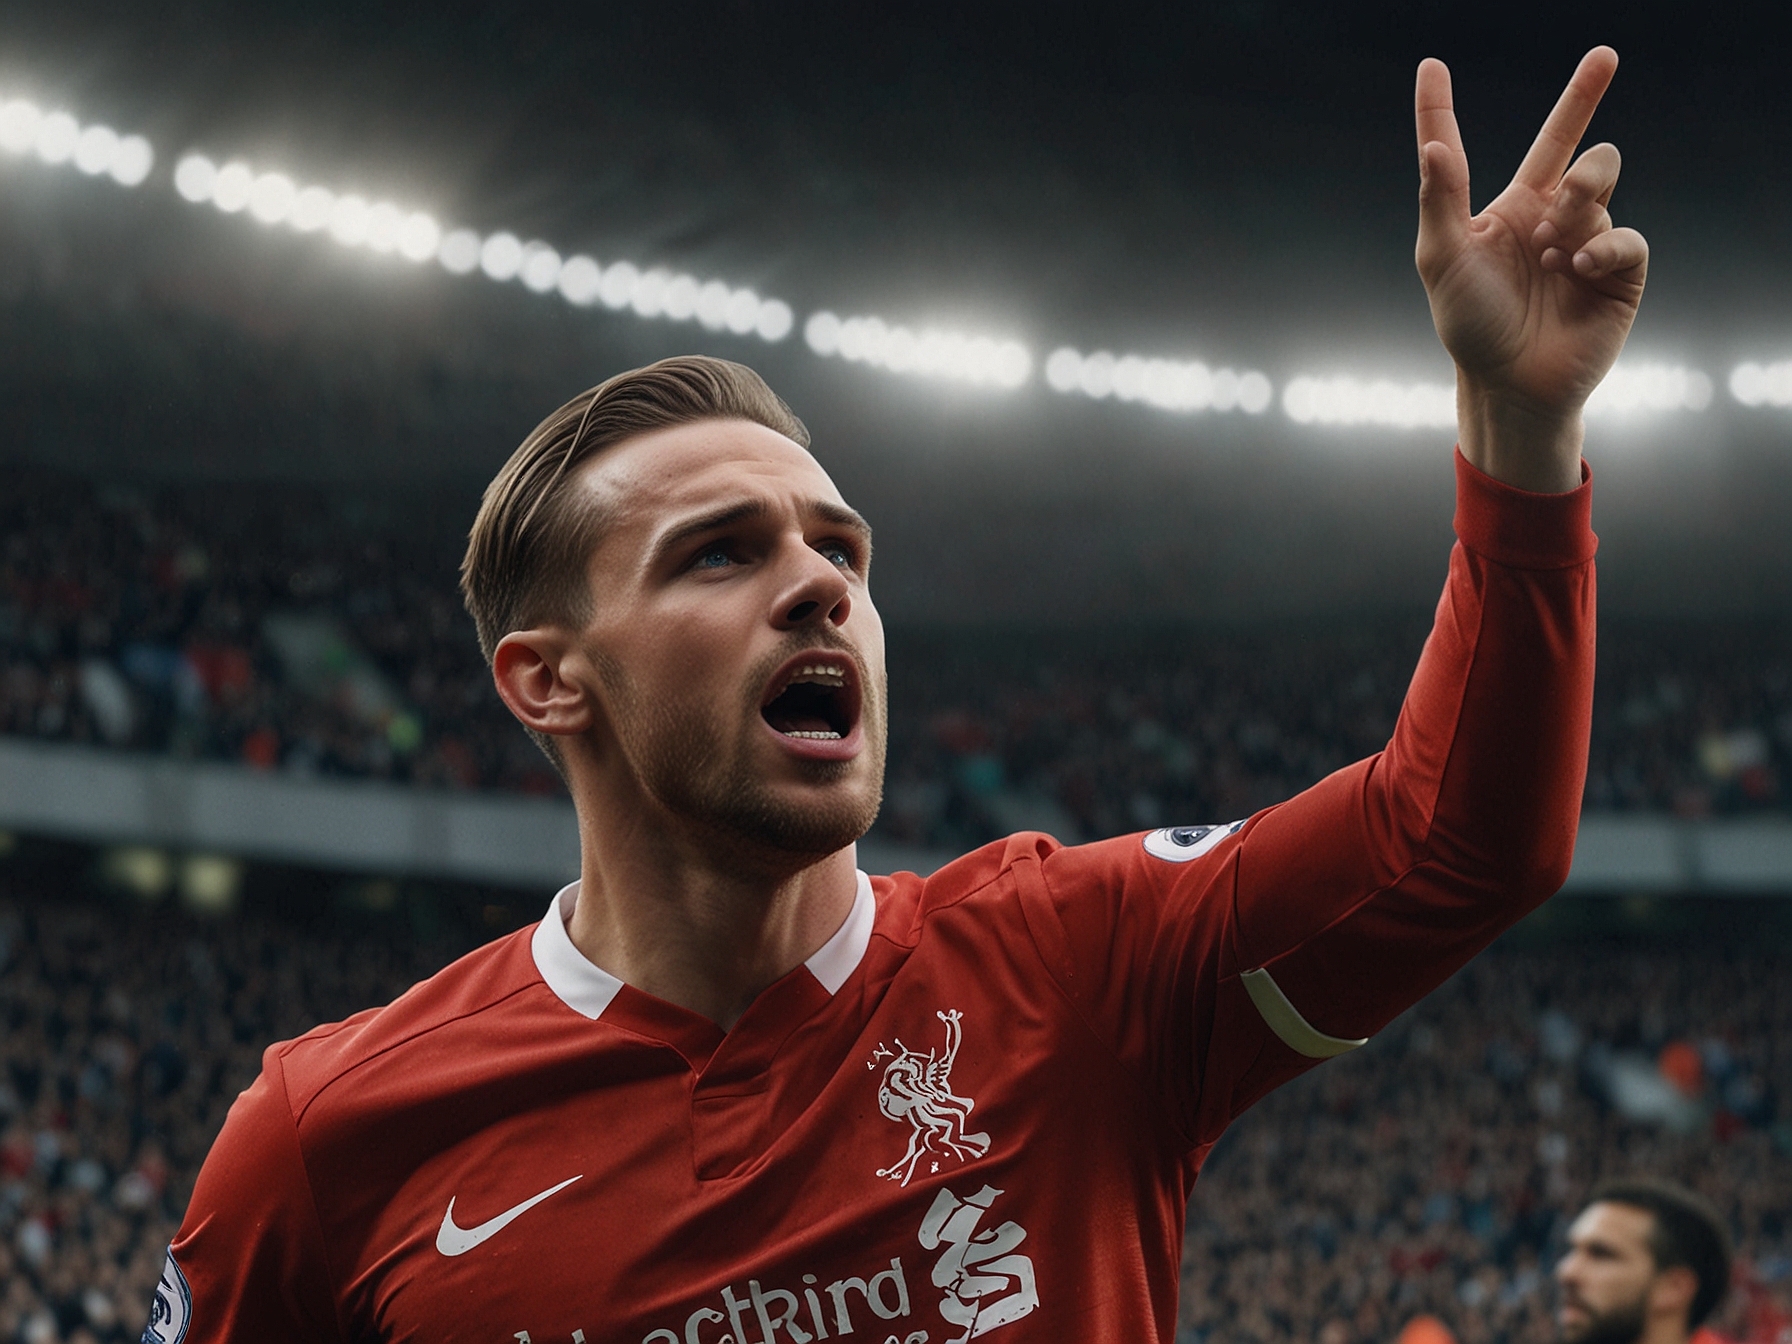 Jordan Henderson passionately expressing himself during a football match.